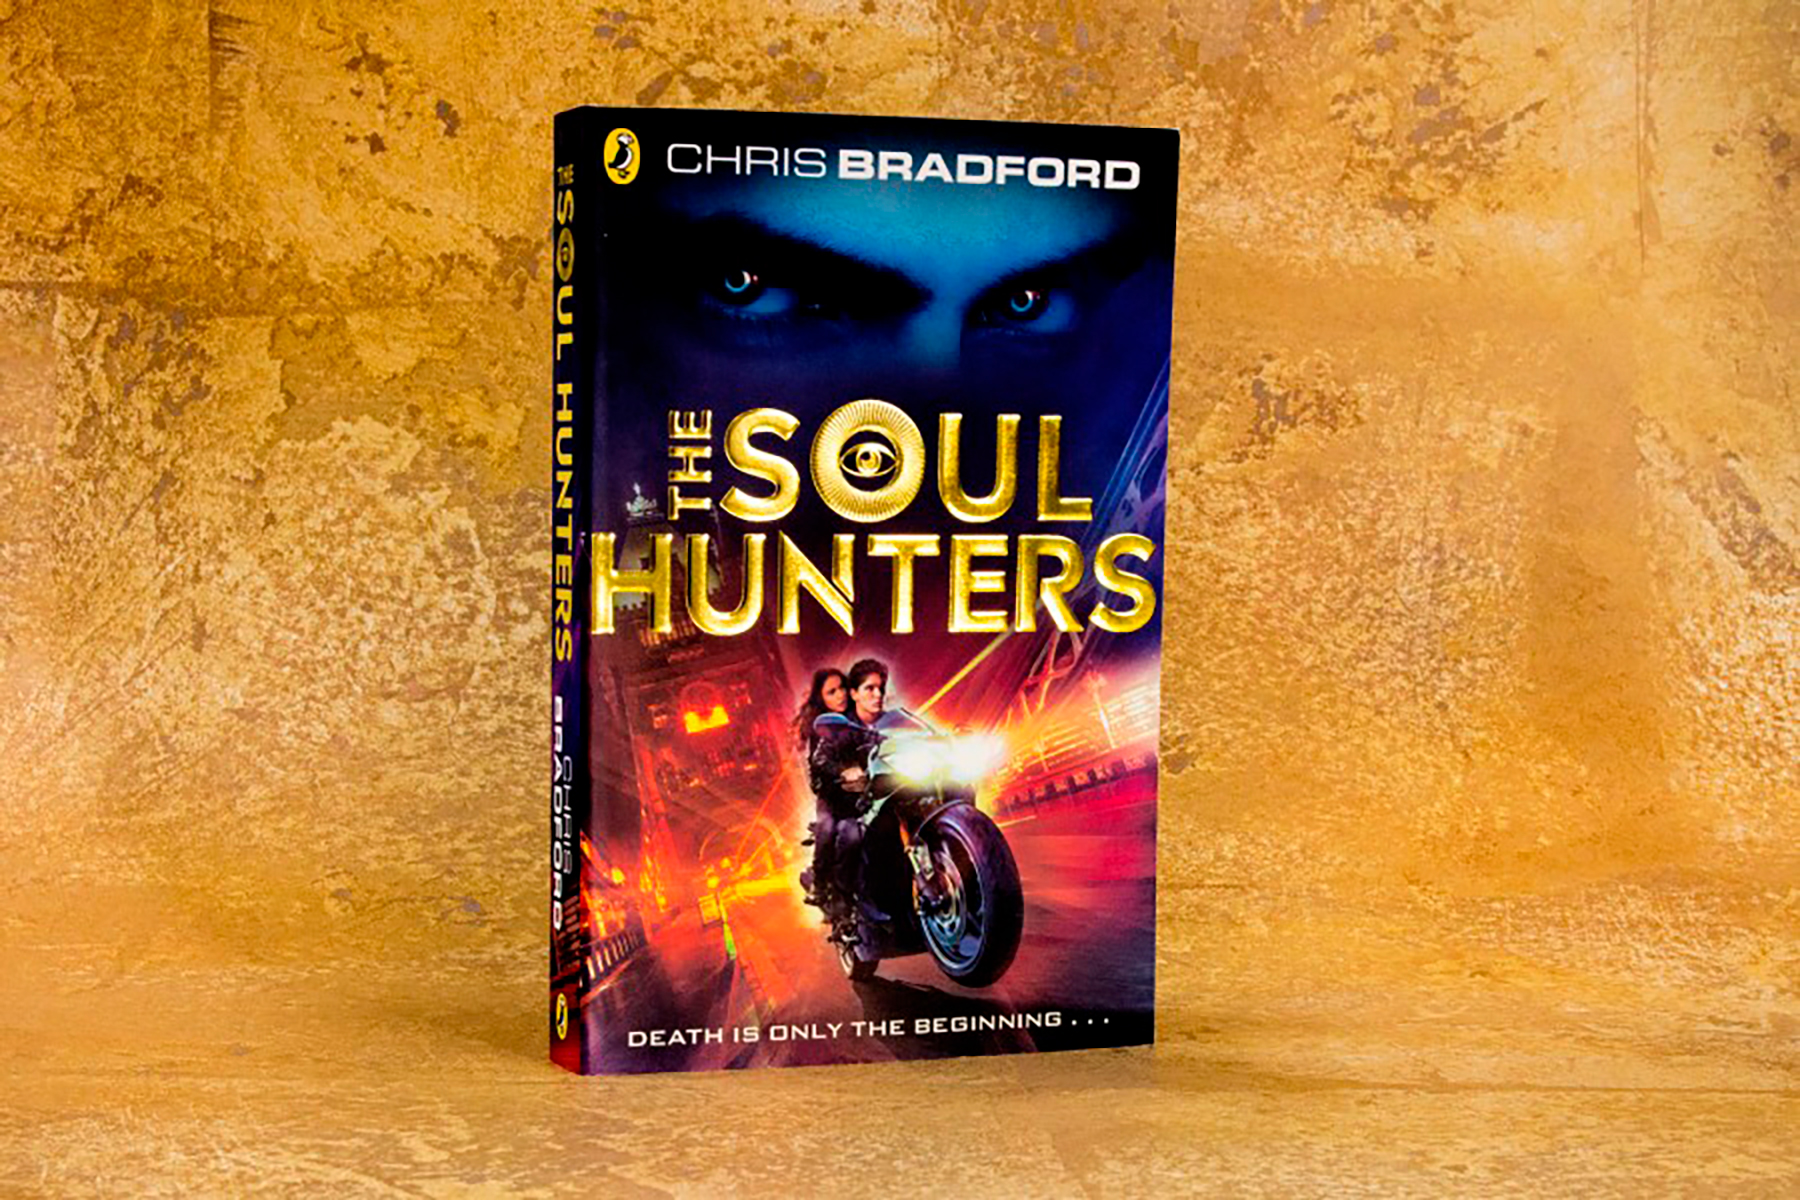 A photo of the book The Soul Hunters by Chris Bradford